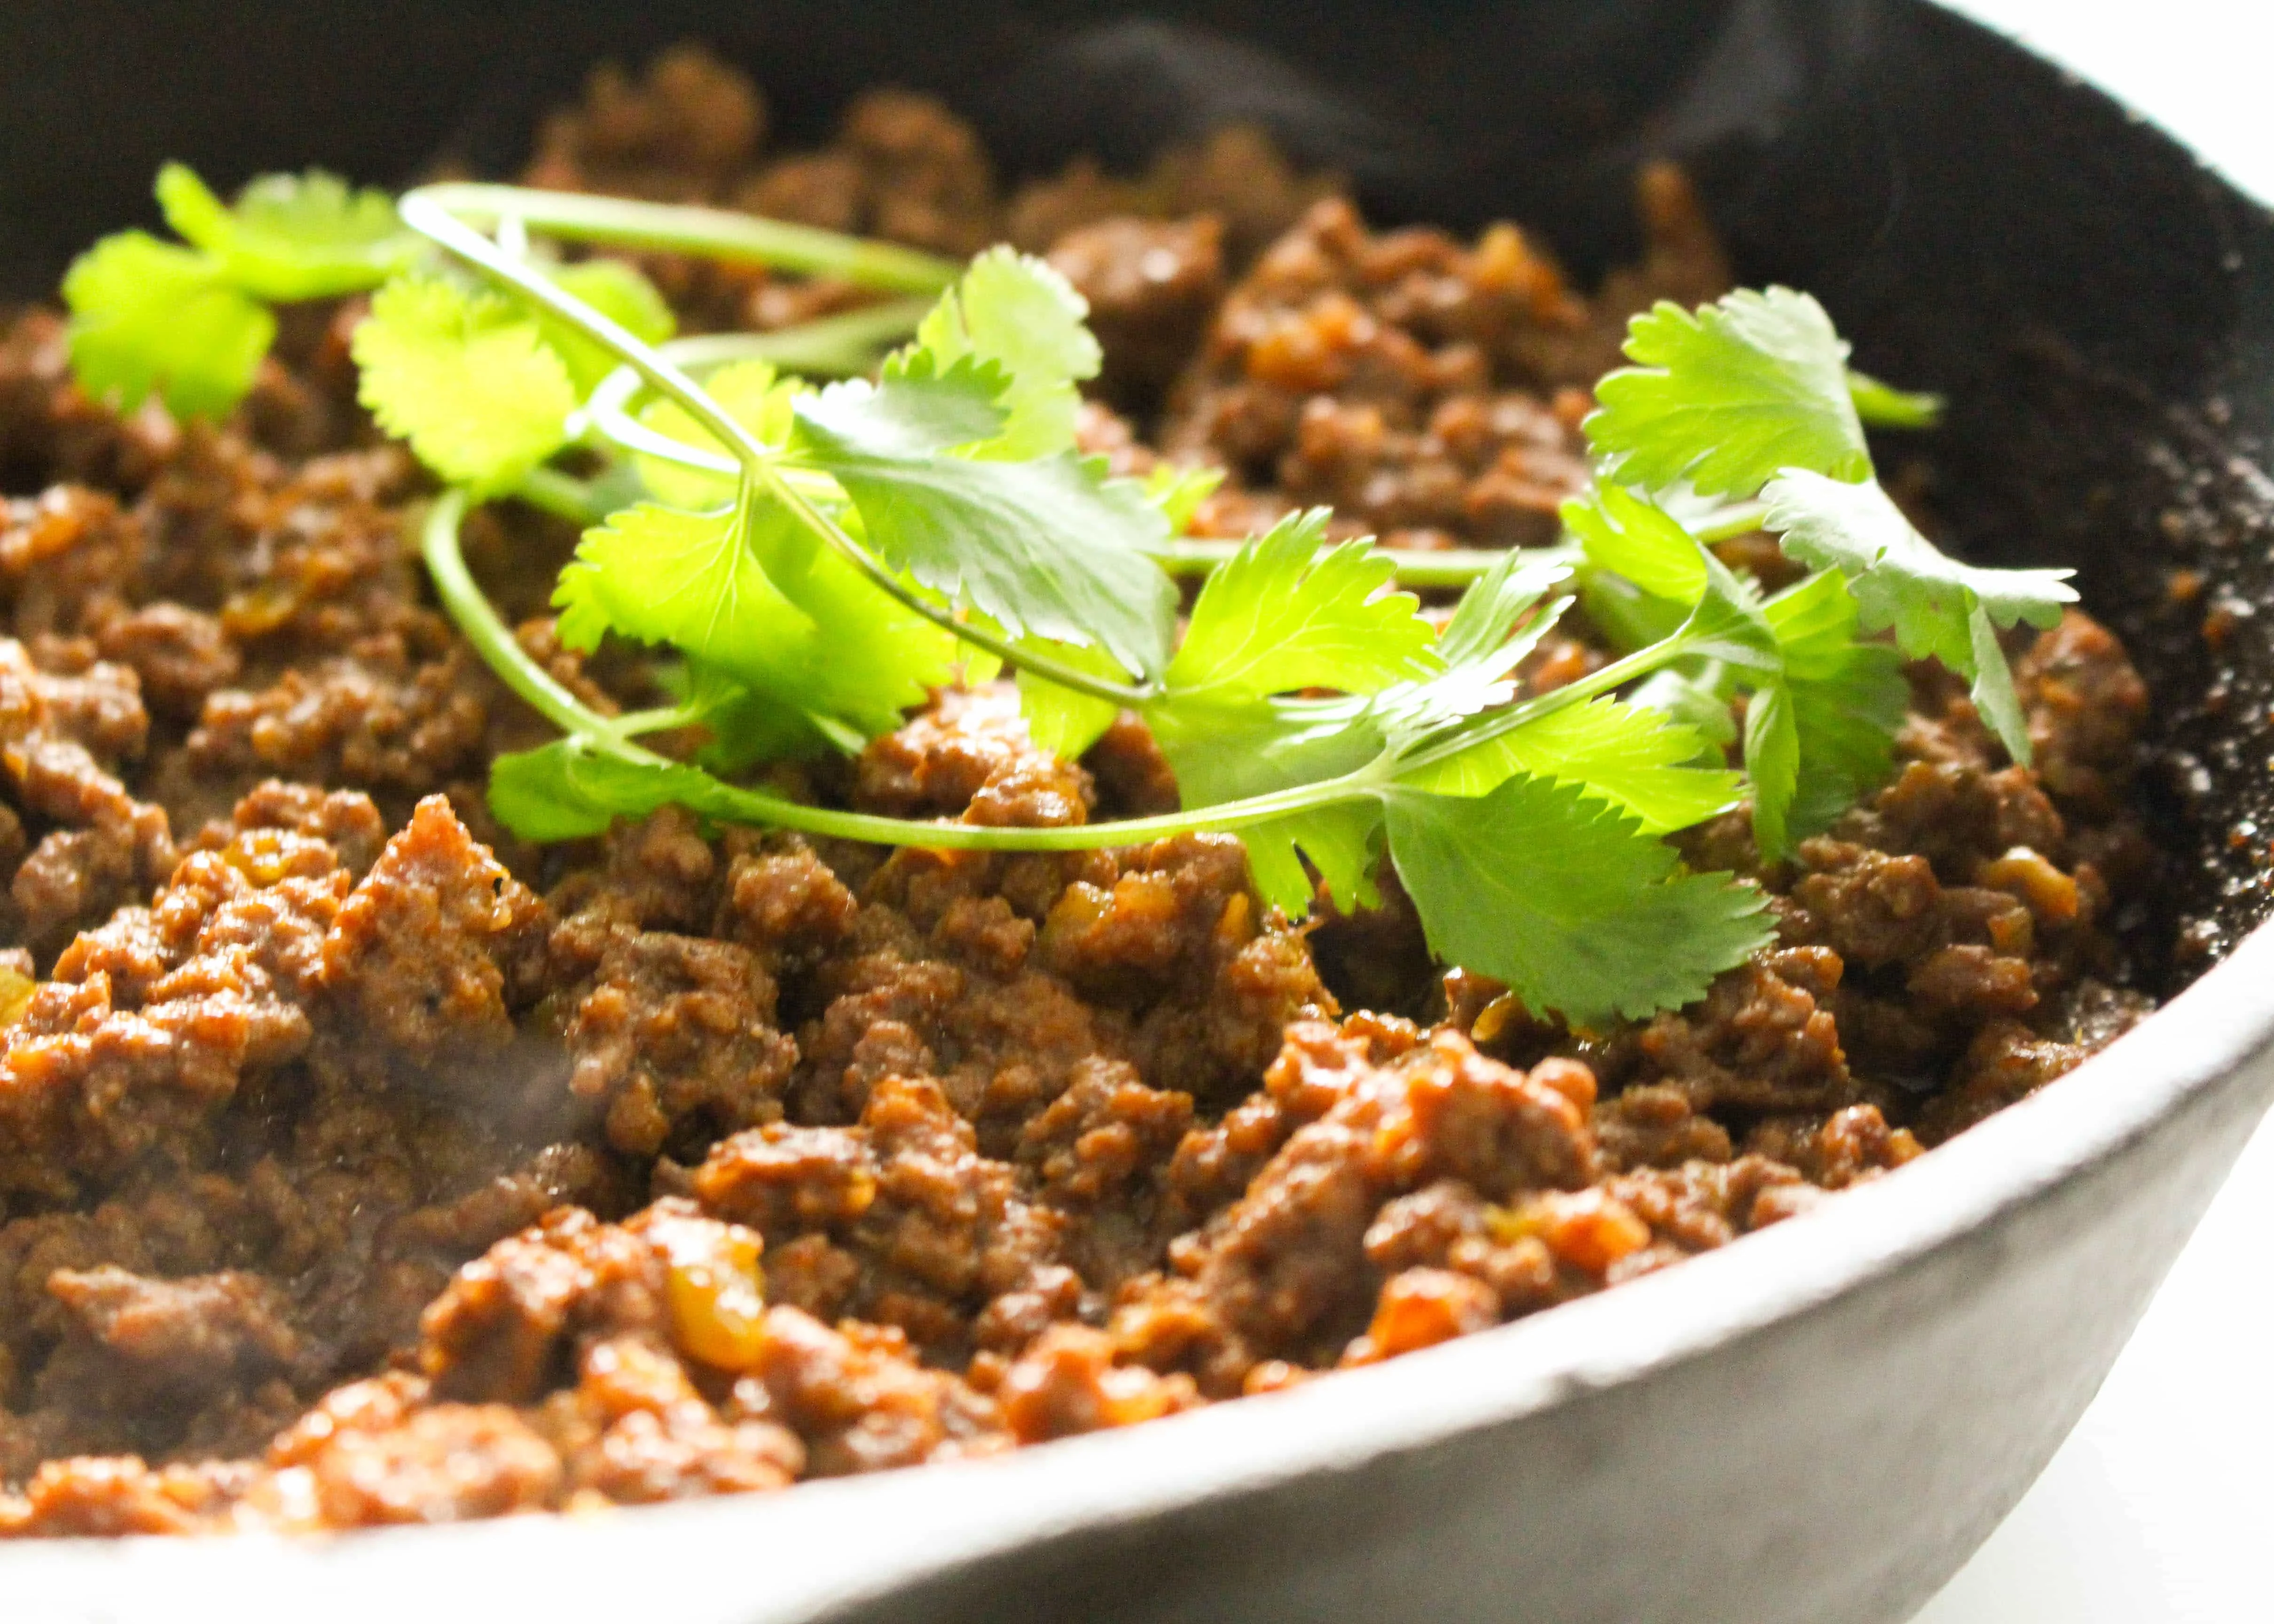 Taco Tuesdays are back with easy to make gluten free taco meat!